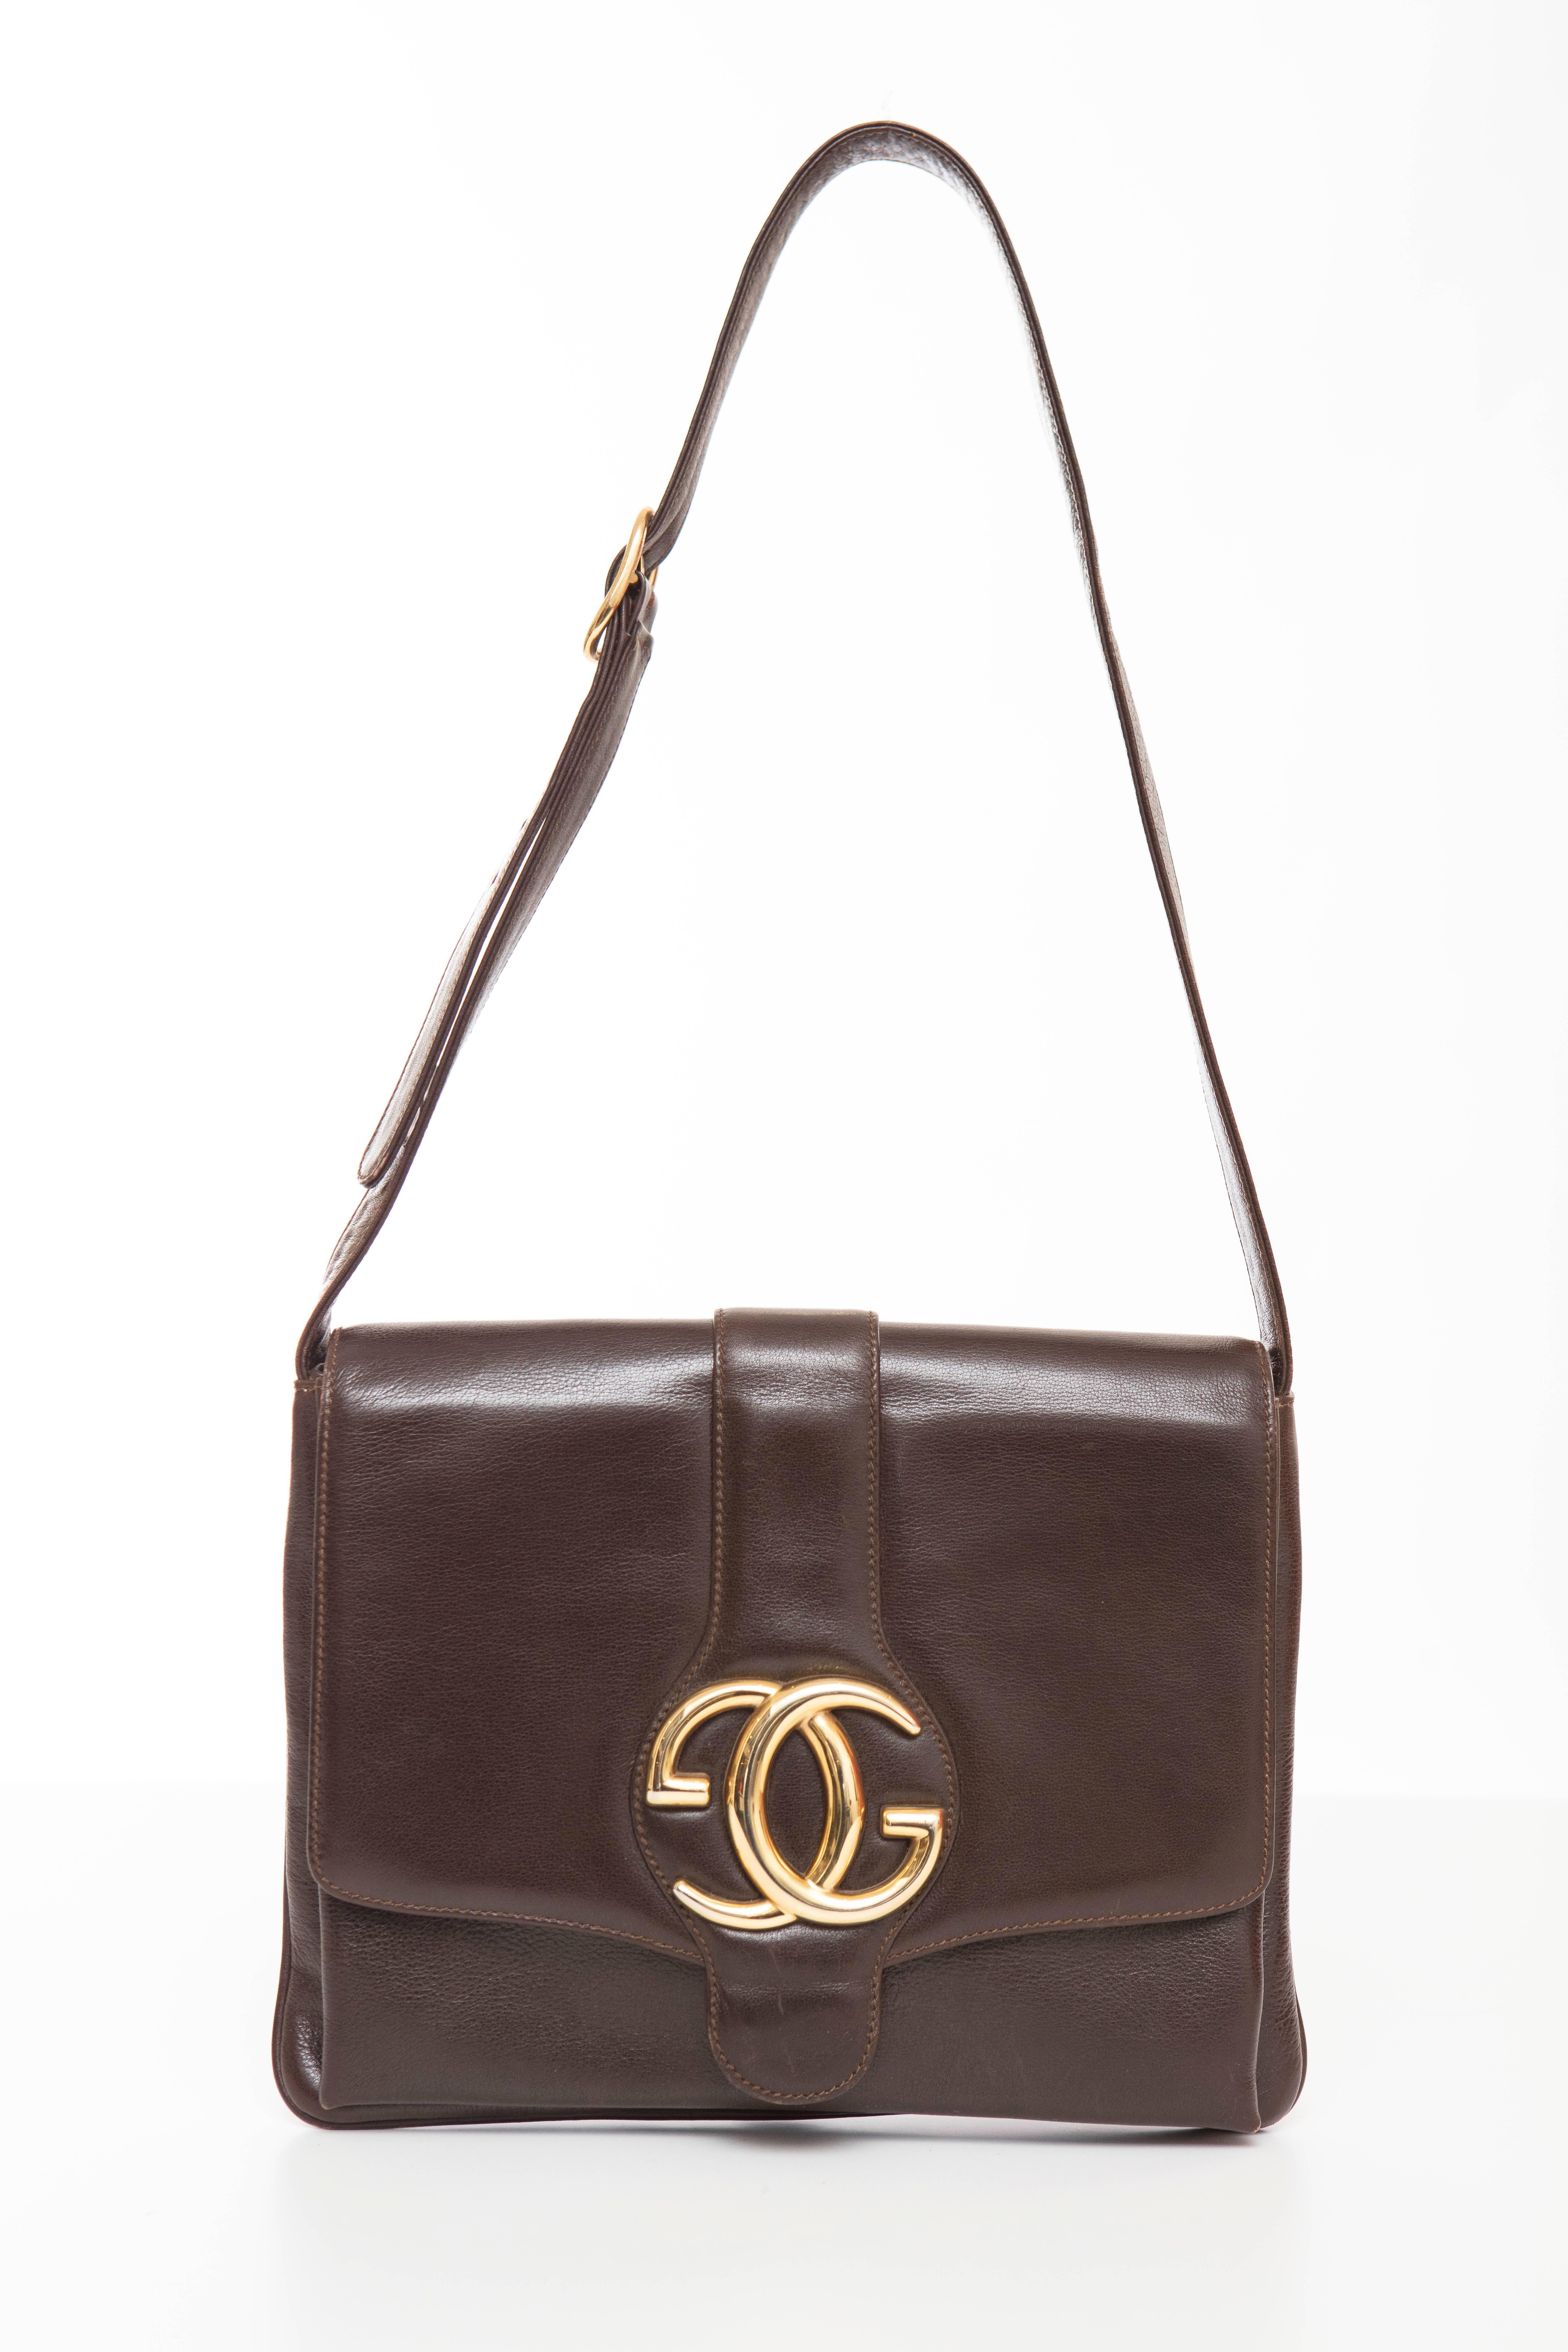 Gucci 1970's brown leather handbag with fold over top flap, gucci gold logo hardware, adjustable strap and two interior compartments with one zip deep pocket.

Serial Number: MOD.BREV 53289

Height 8, Width 10, Depth 1, Shoulder Strap Adjust To 13 -